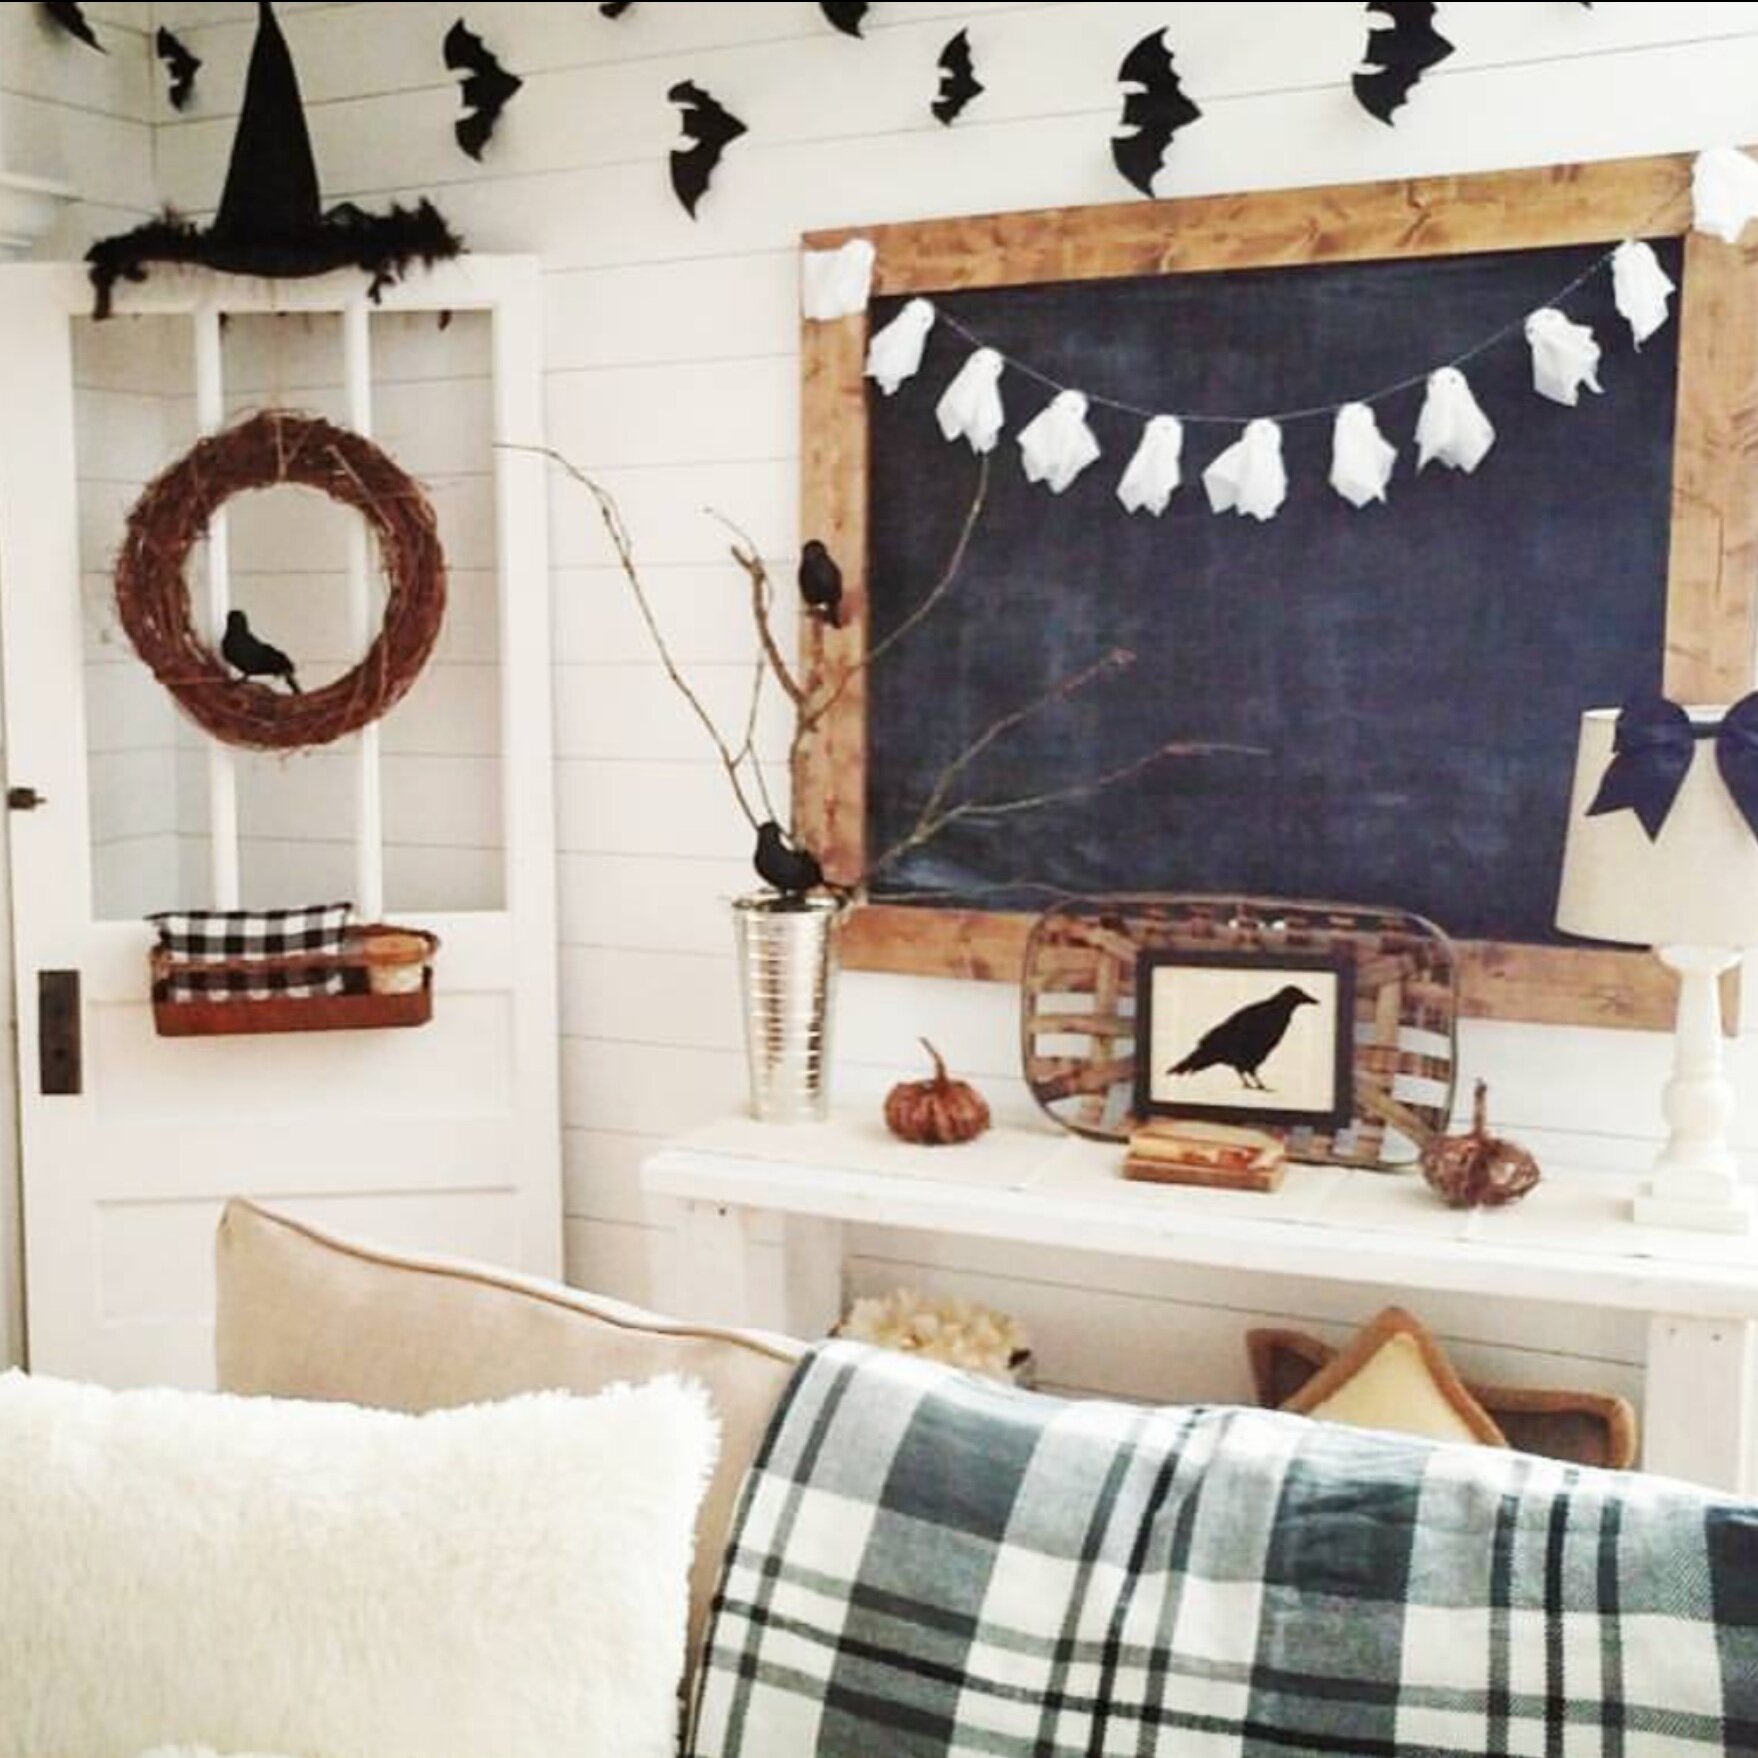 Bloggers We Love-Ashli from Our Cozy Cottage